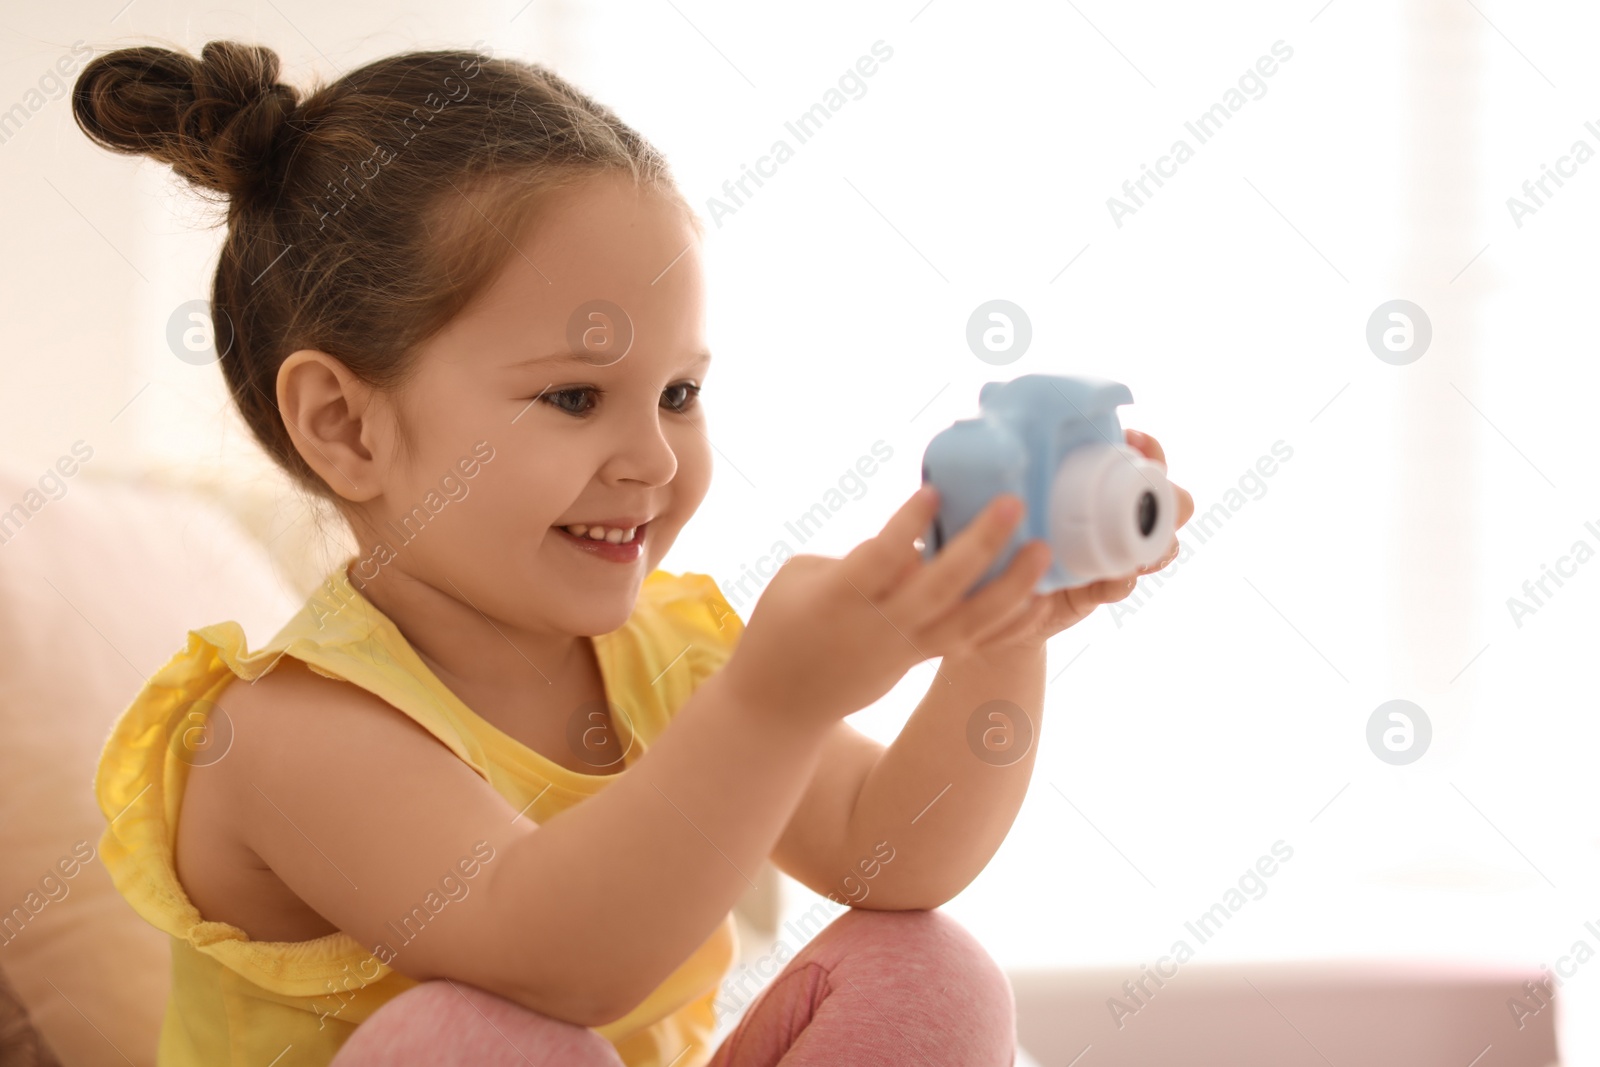 Photo of Little photographer taking picture with toy camera on sofa at home